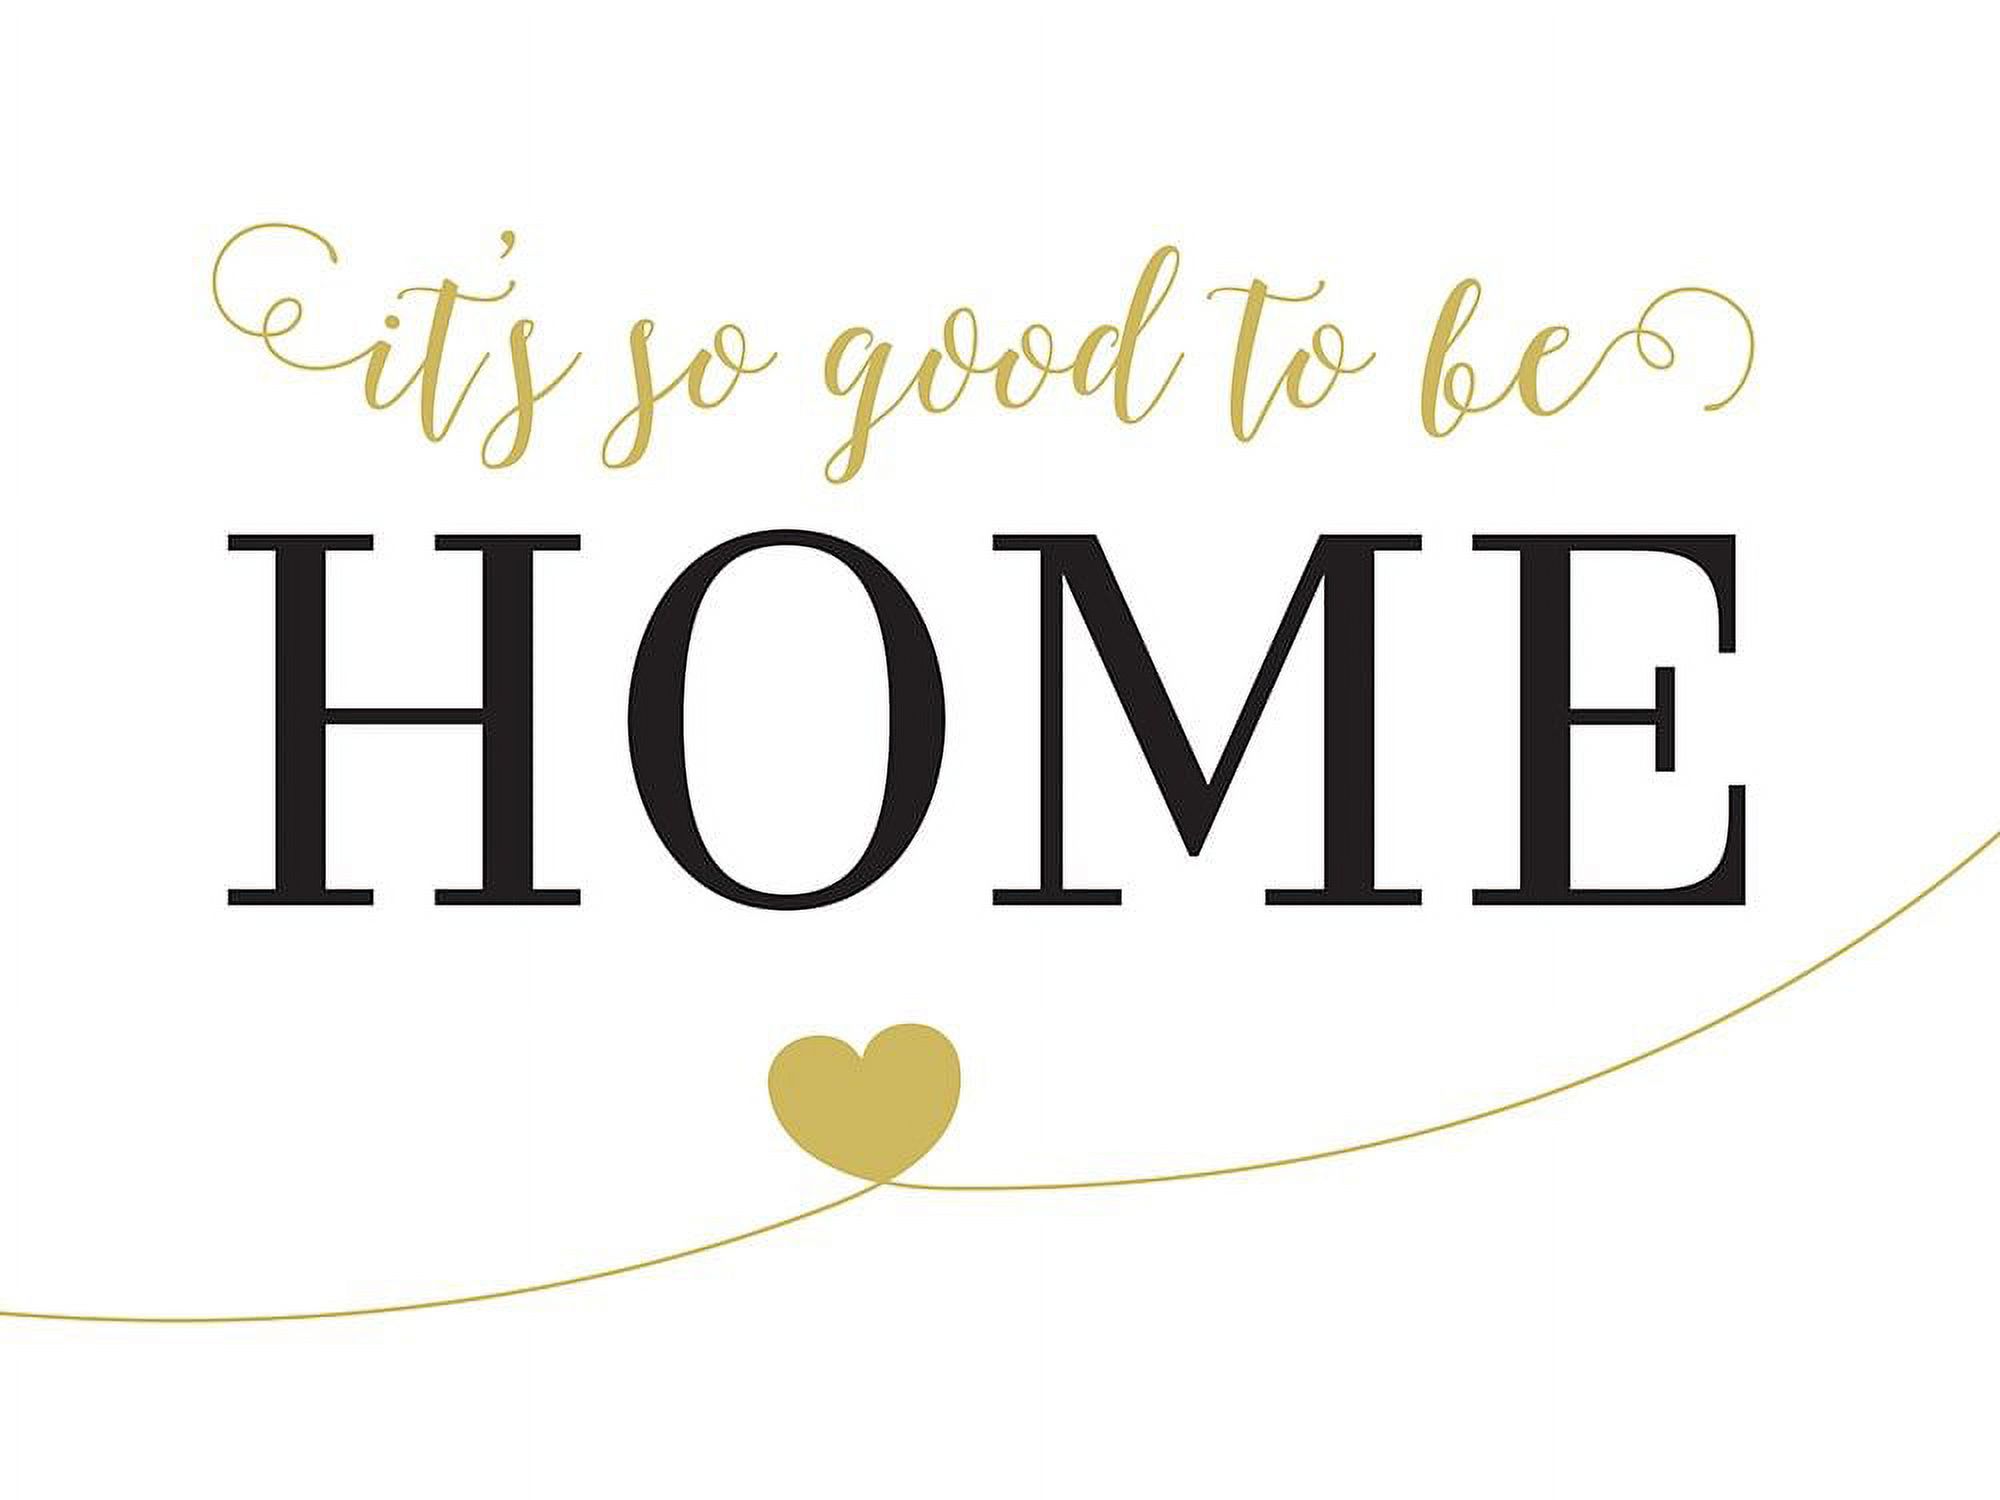 Its So Good To Be Home by Leslie McFarland (36 x 24) - image 1 of 1